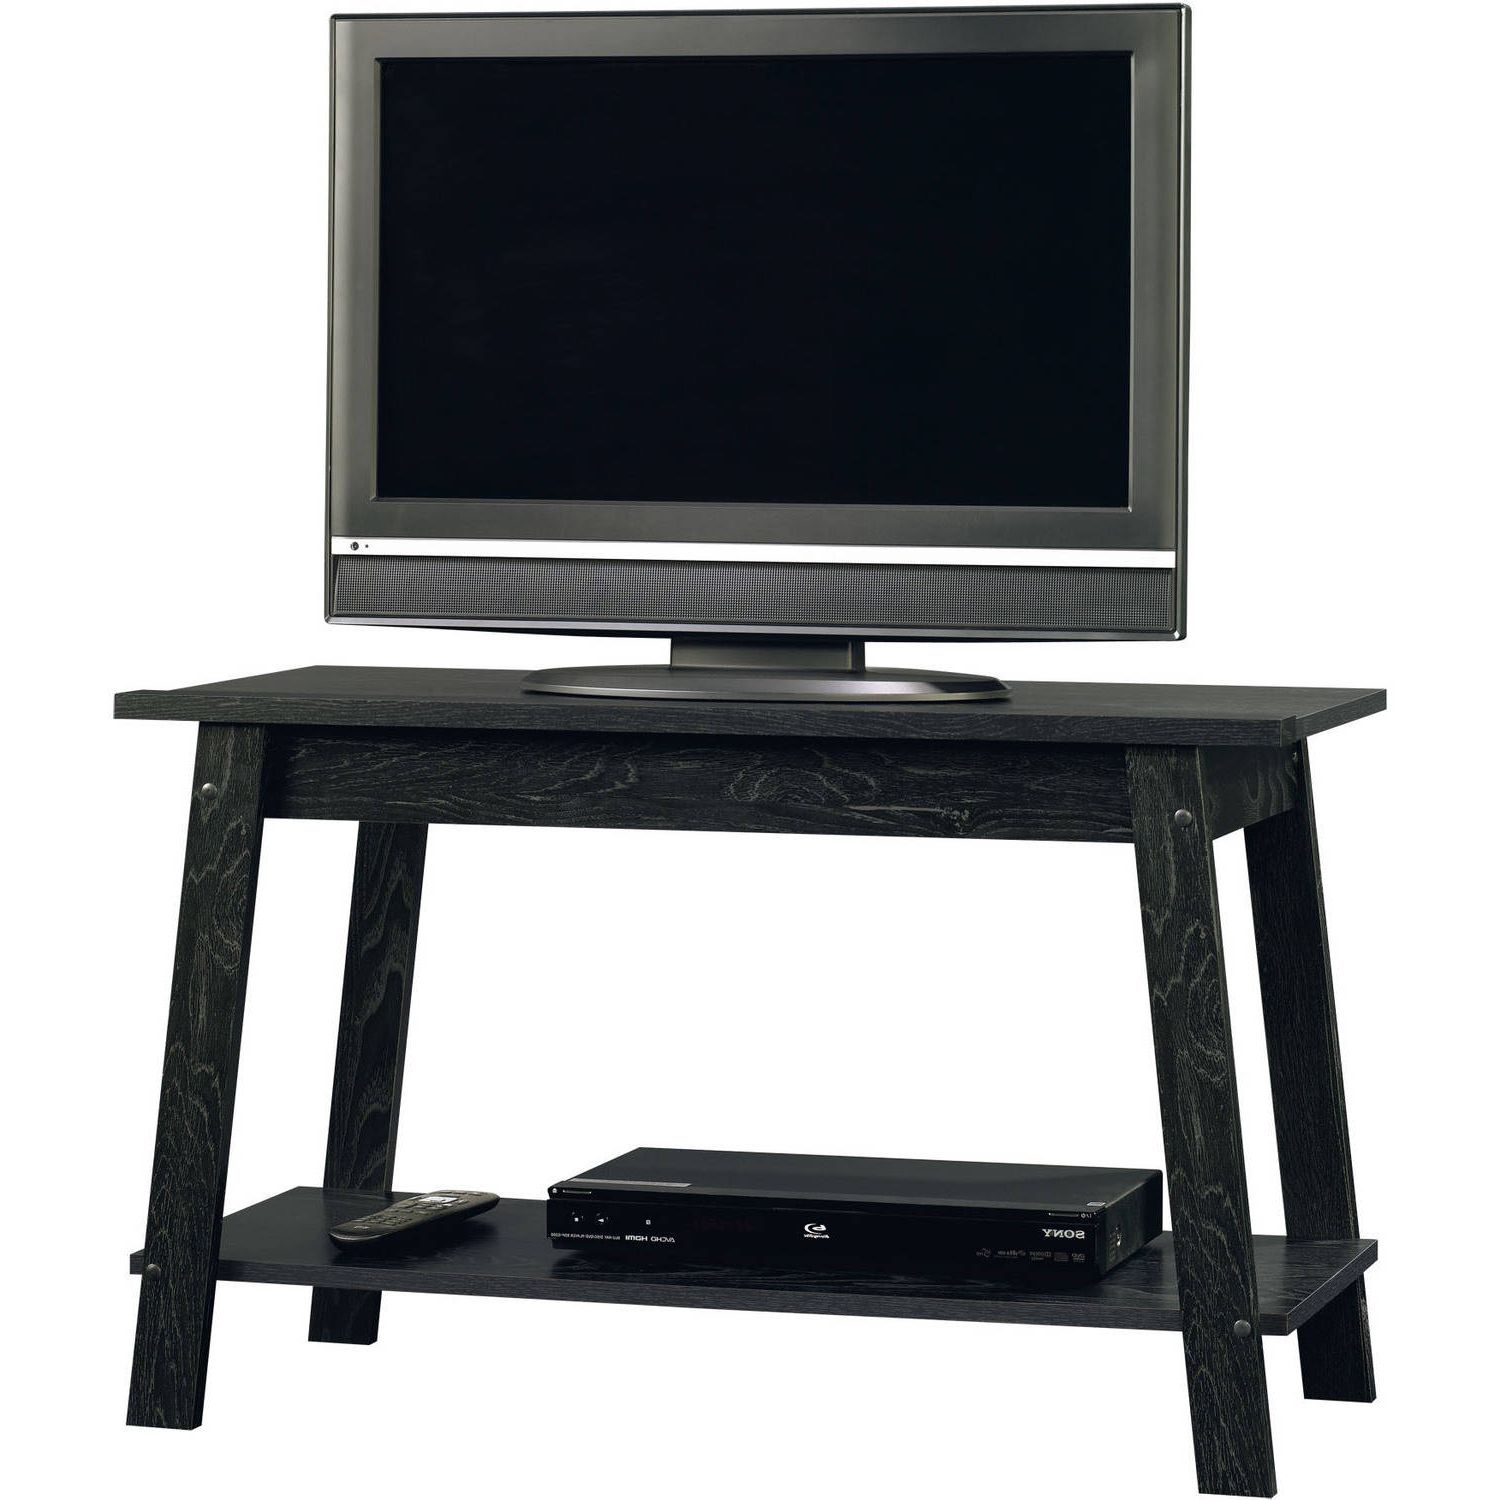 Trendy Small Tv Stands On Wheels Pertaining To Tv Stands: Modern Small Narrow Tv Stand On Wheels Tv Wall Cabinets (View 6 of 20)